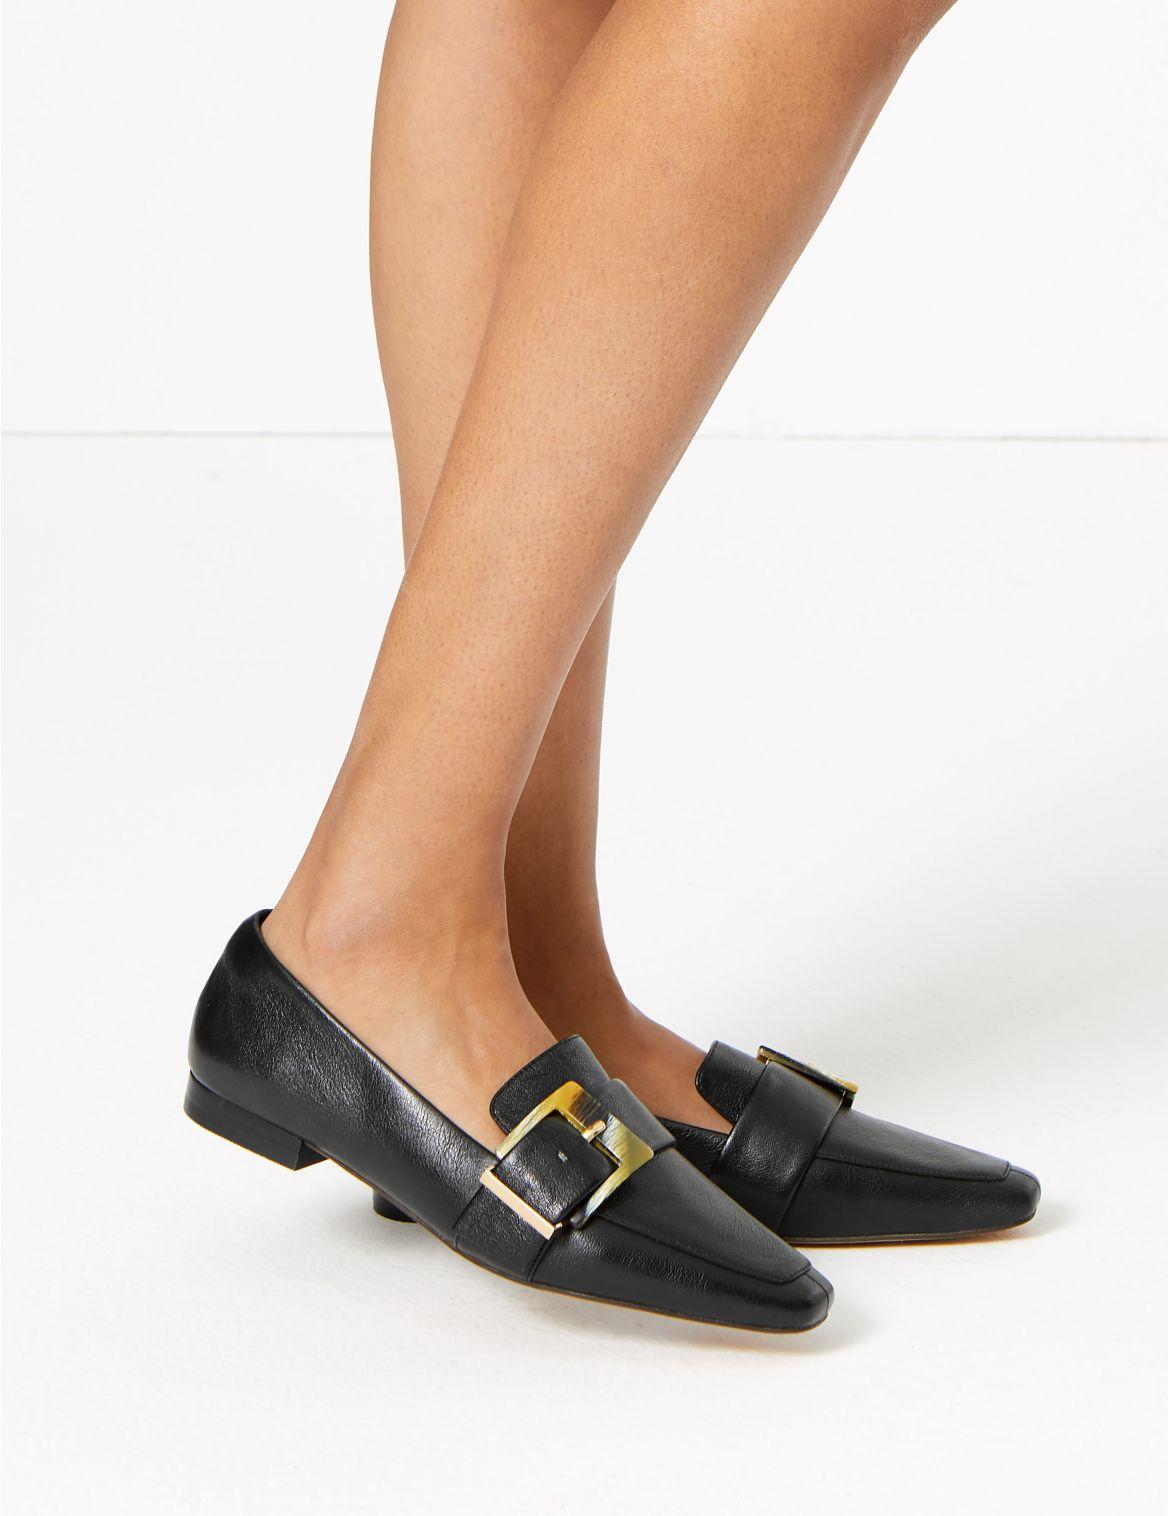 Marks & Spencer Leather Buckled Square Toe Loafers in Black - Lyst